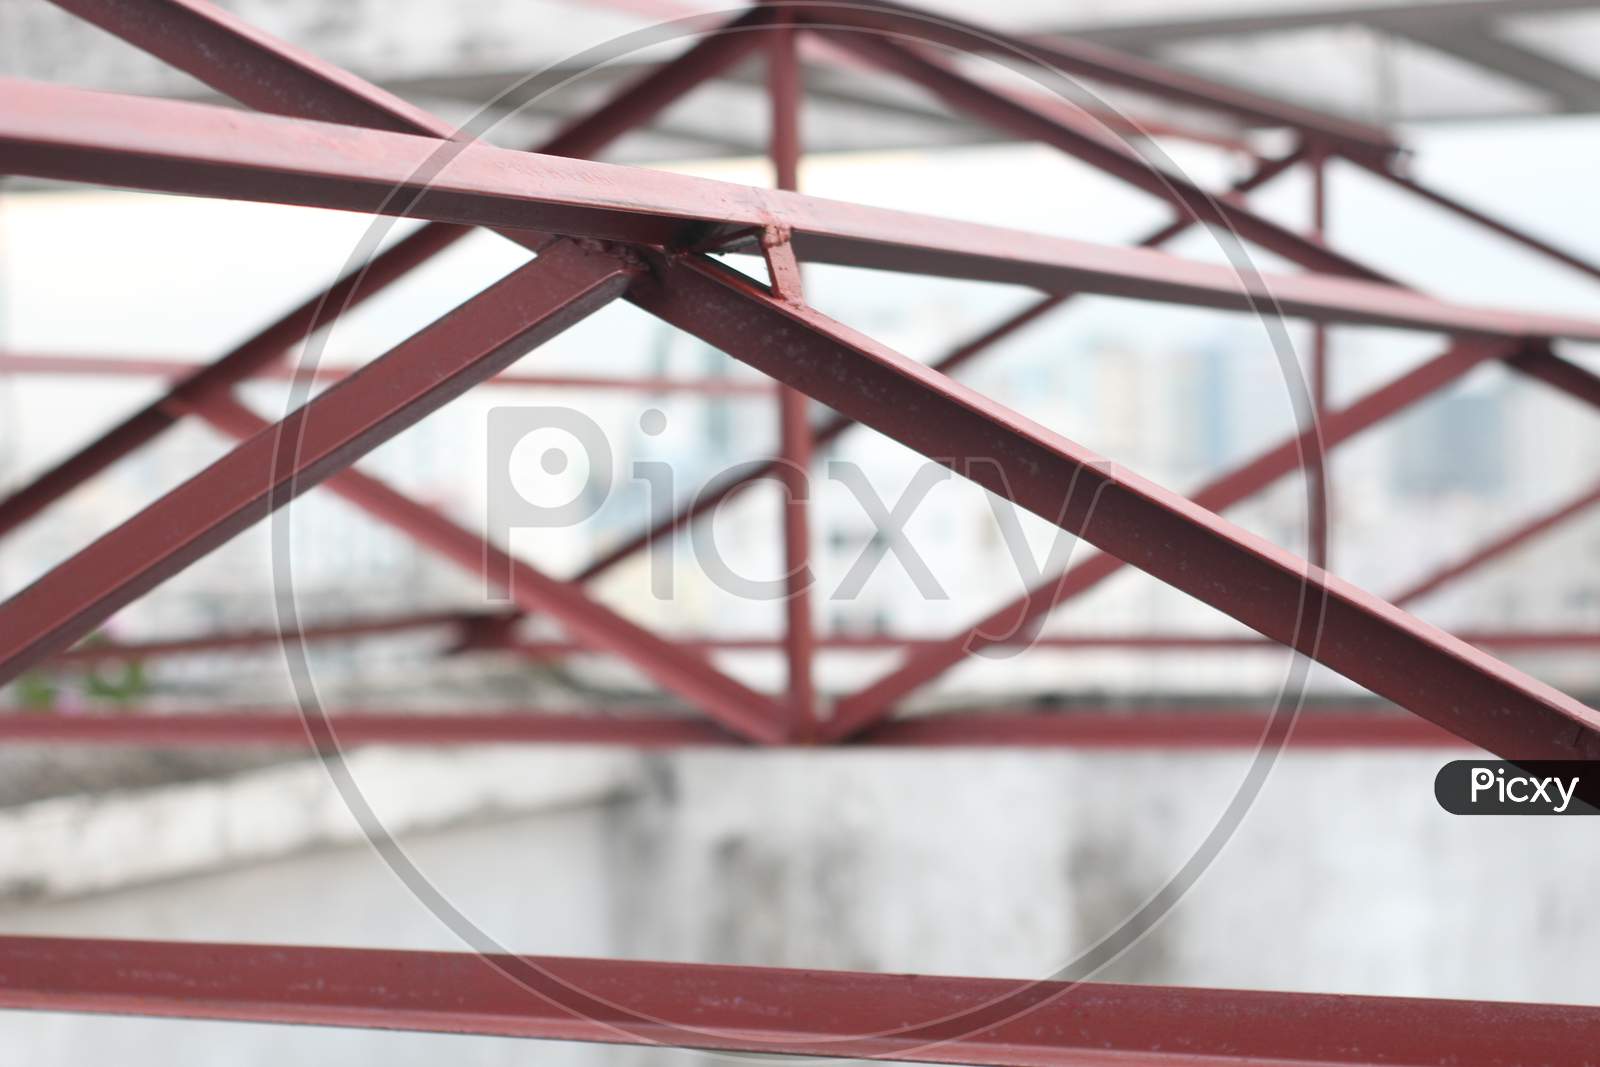 The structure of a bridge.